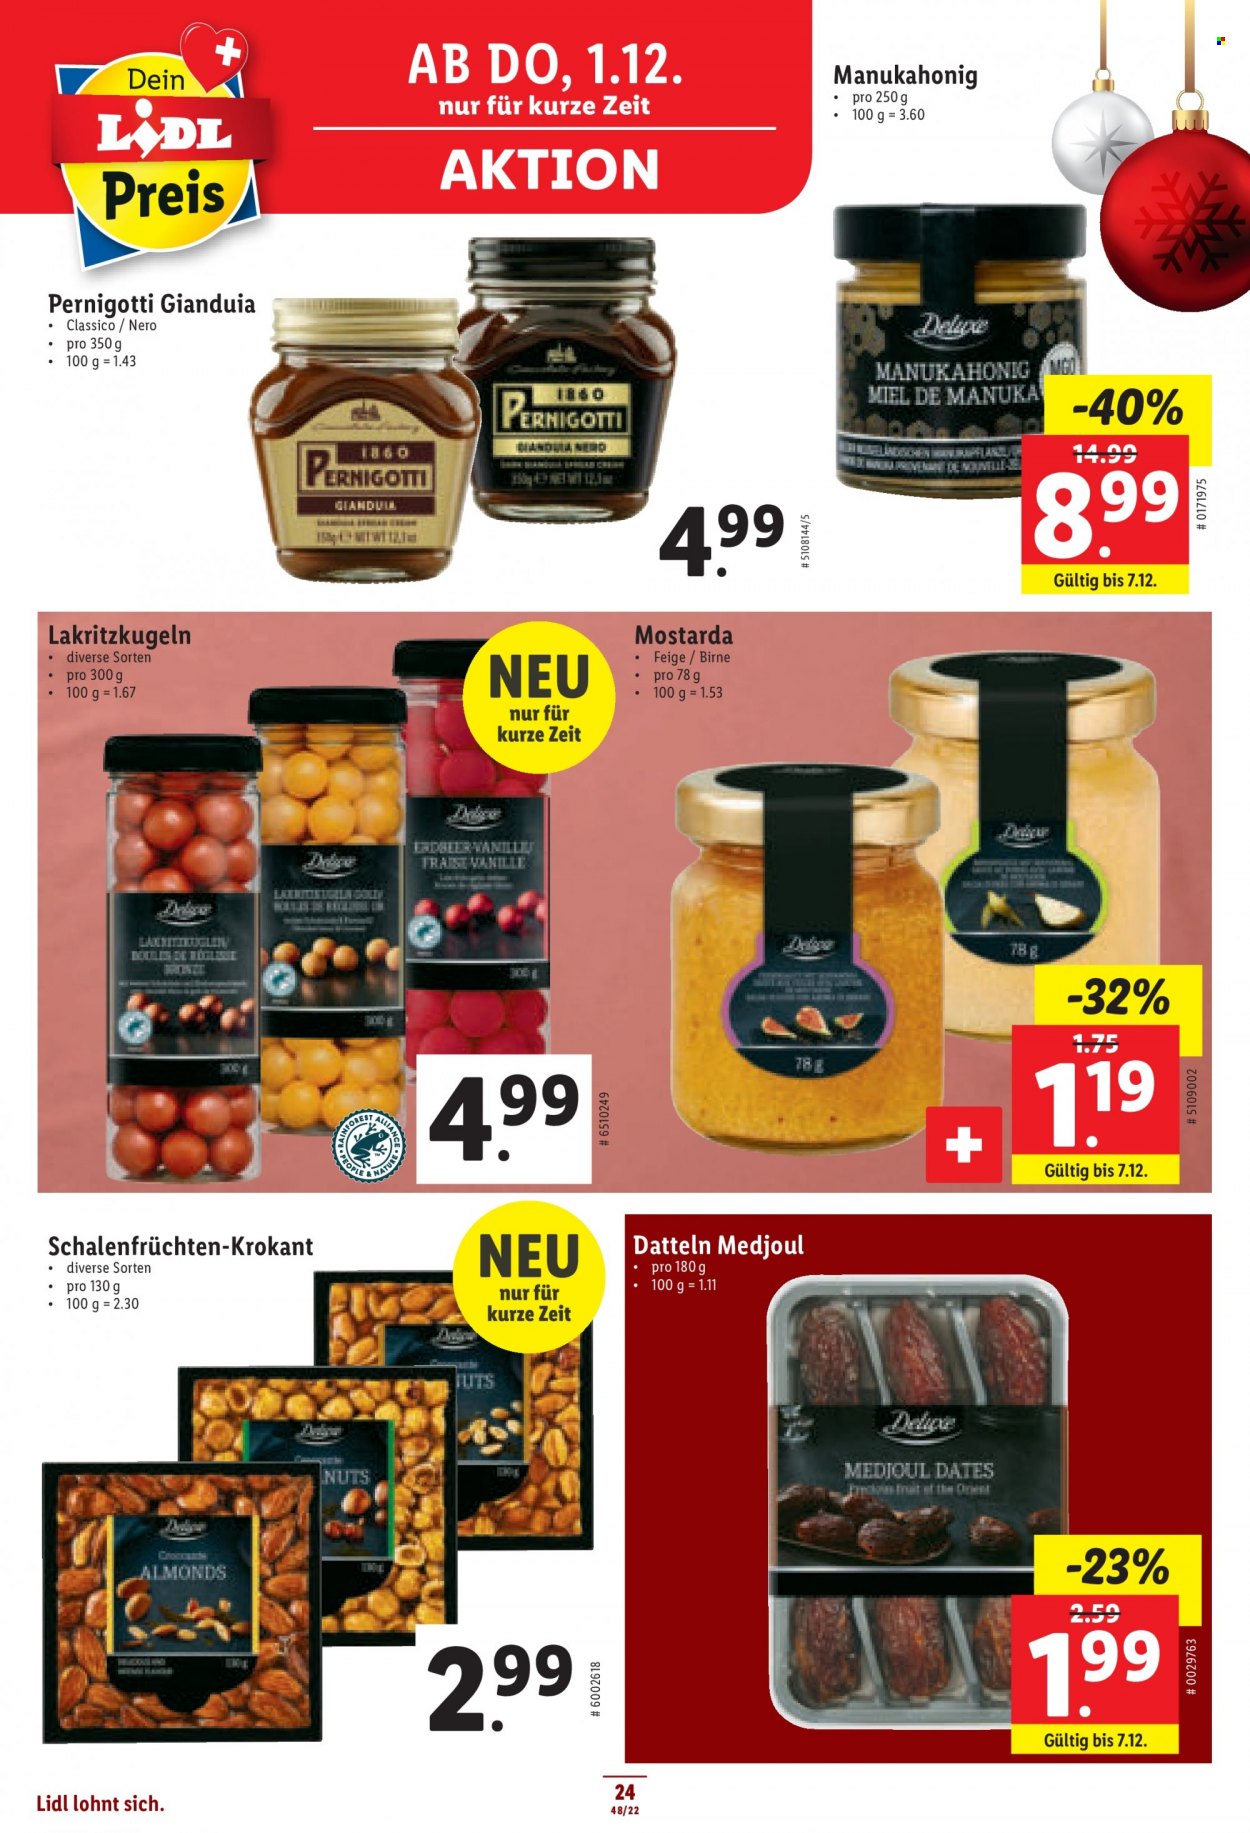 Catalogue Lidl - 1.12.2022 - 7.12.2022. Page 24.